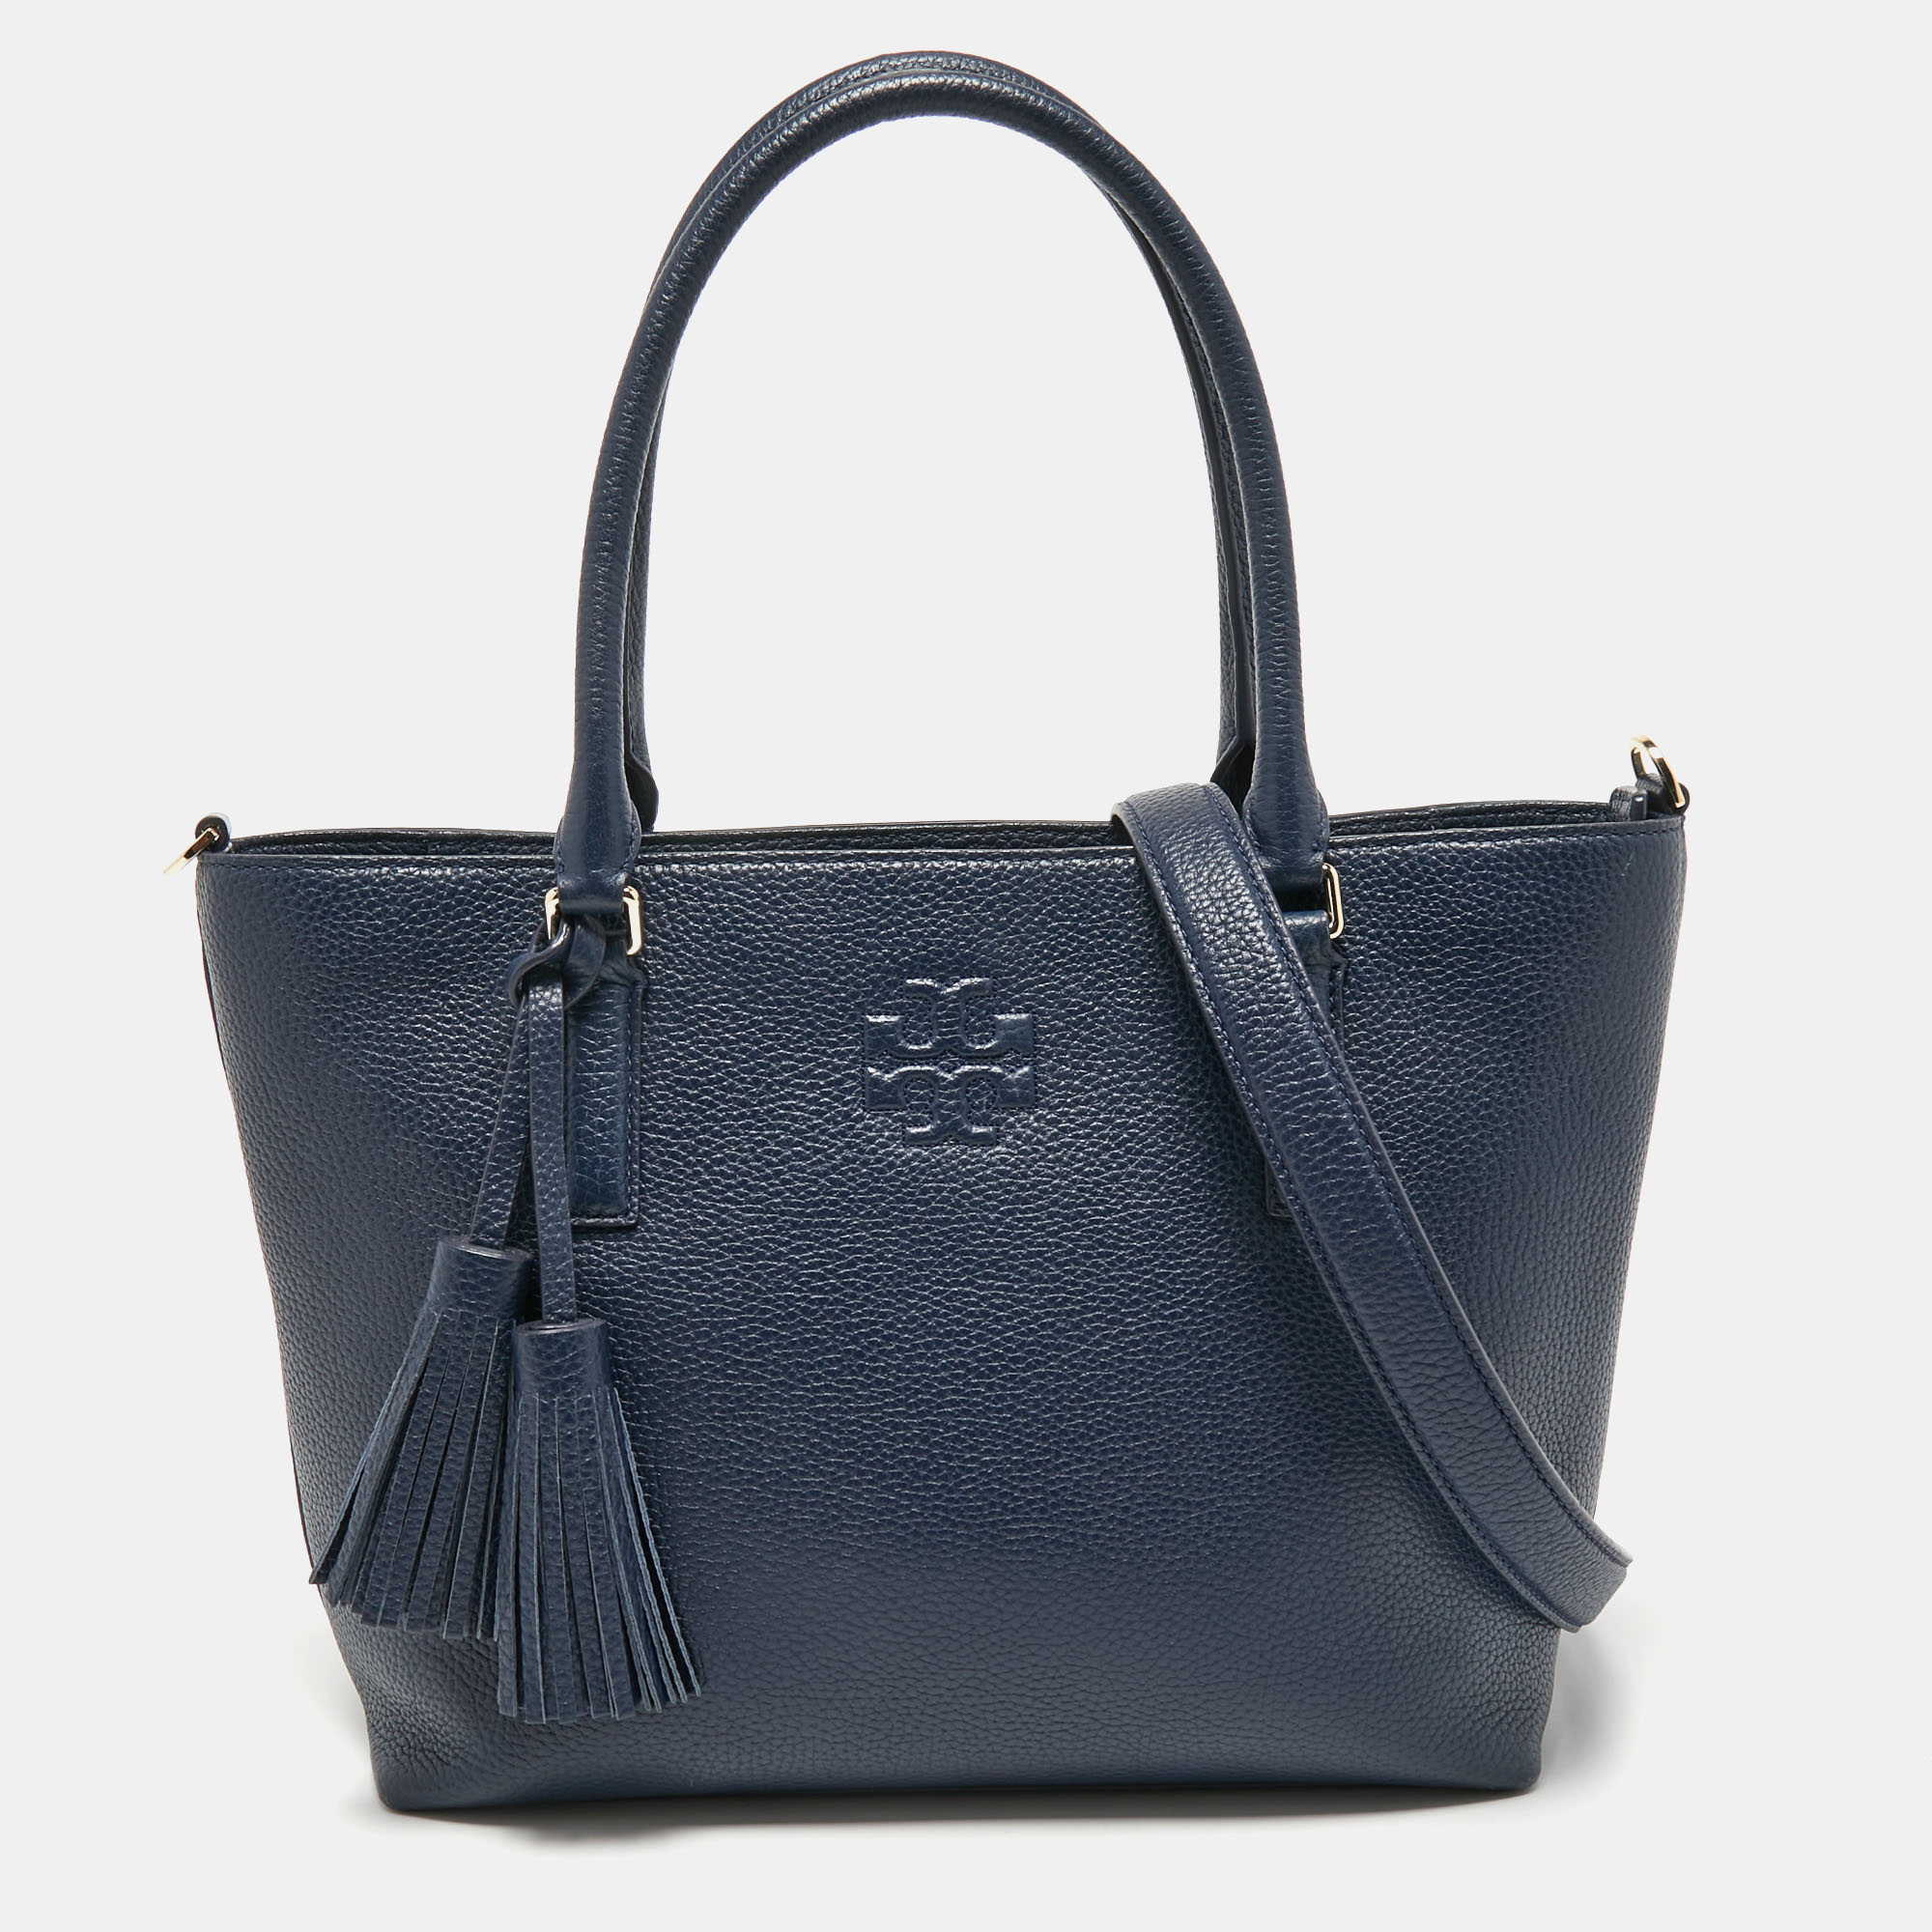 Tory Burch Navy Blue Leather Thea Convertible Tote